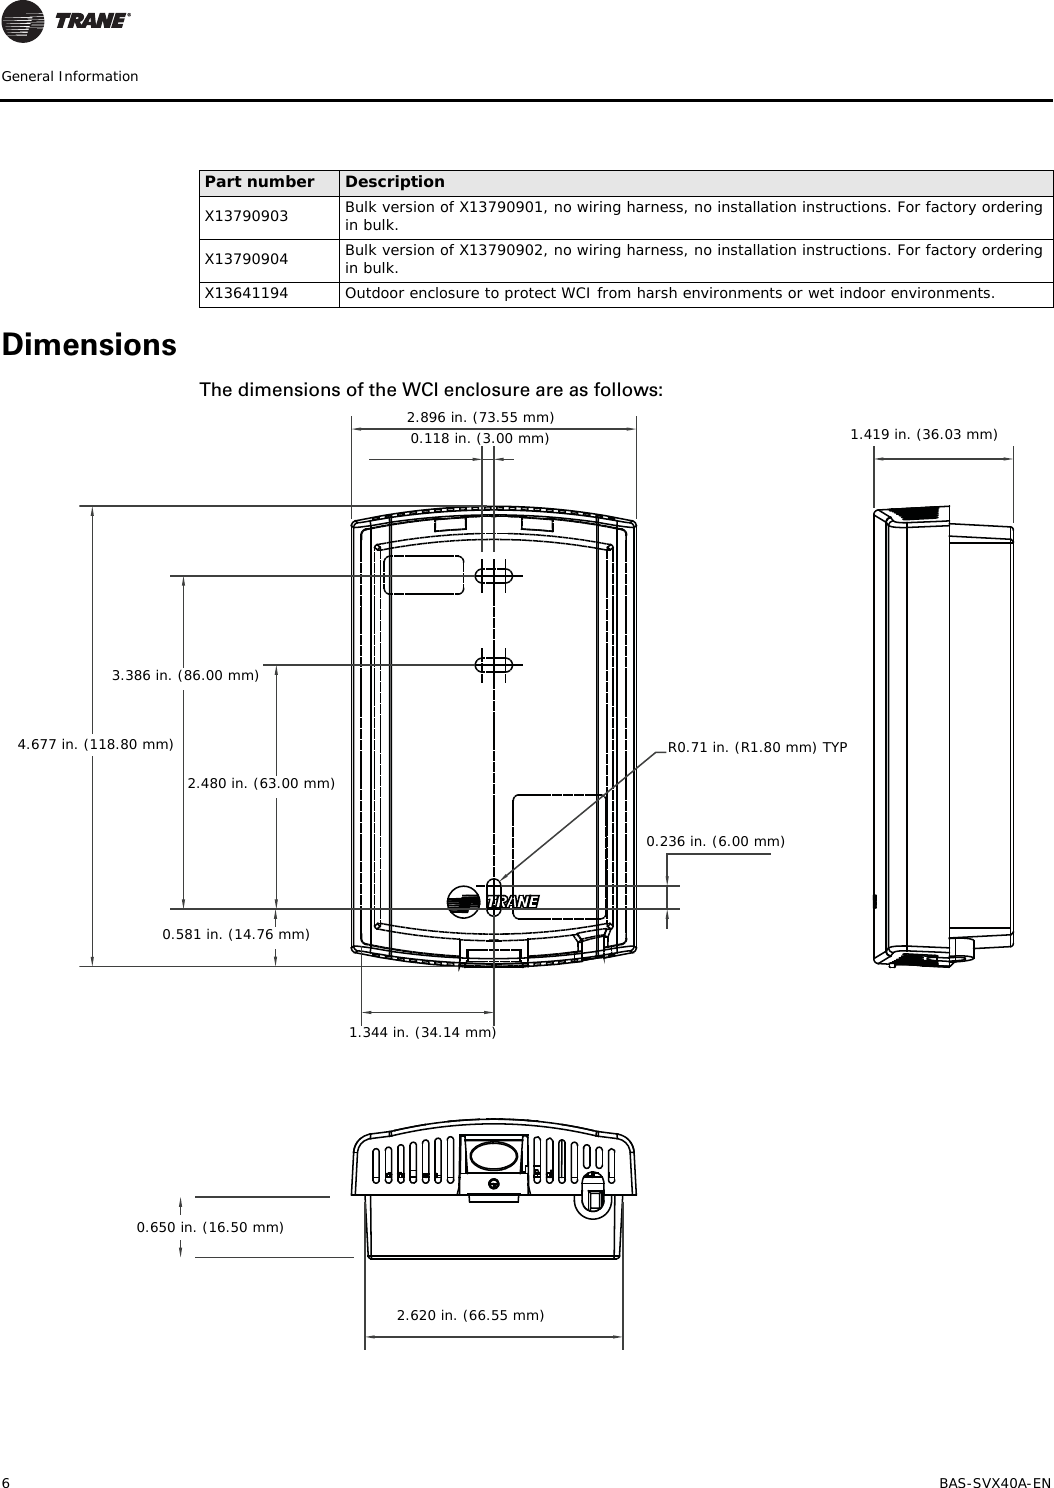 6 BAS-SVX40A-ENGeneral InformationDimensionsThe dimensions of the WCI enclosure are as follows:X13790903 Bulk version of X13790901, no wiring harness, no installation instructions. For factory ordering in bulk.X13790904 Bulk version of X13790902, no wiring harness, no installation instructions. For factory ordering in bulk.X13641194 Outdoor enclosure to protect WCI from harsh environments or wet indoor environments.Part number Description0.650 in. (16.50 mm) 2.896 in. (73.55 mm)3.386 in. (86.00 mm)2.480 in. (63.00 mm)1.344 in. (34.14 mm)0.236 in. (6.00 mm) 1.419 in. (36.03 mm)4.677 in. (118.80 mm)0.118 in. (3.00 mm)2.620 in. (66.55 mm)0.581 in. (14.76 mm)R0.71 in. (R1.80 mm) TYP